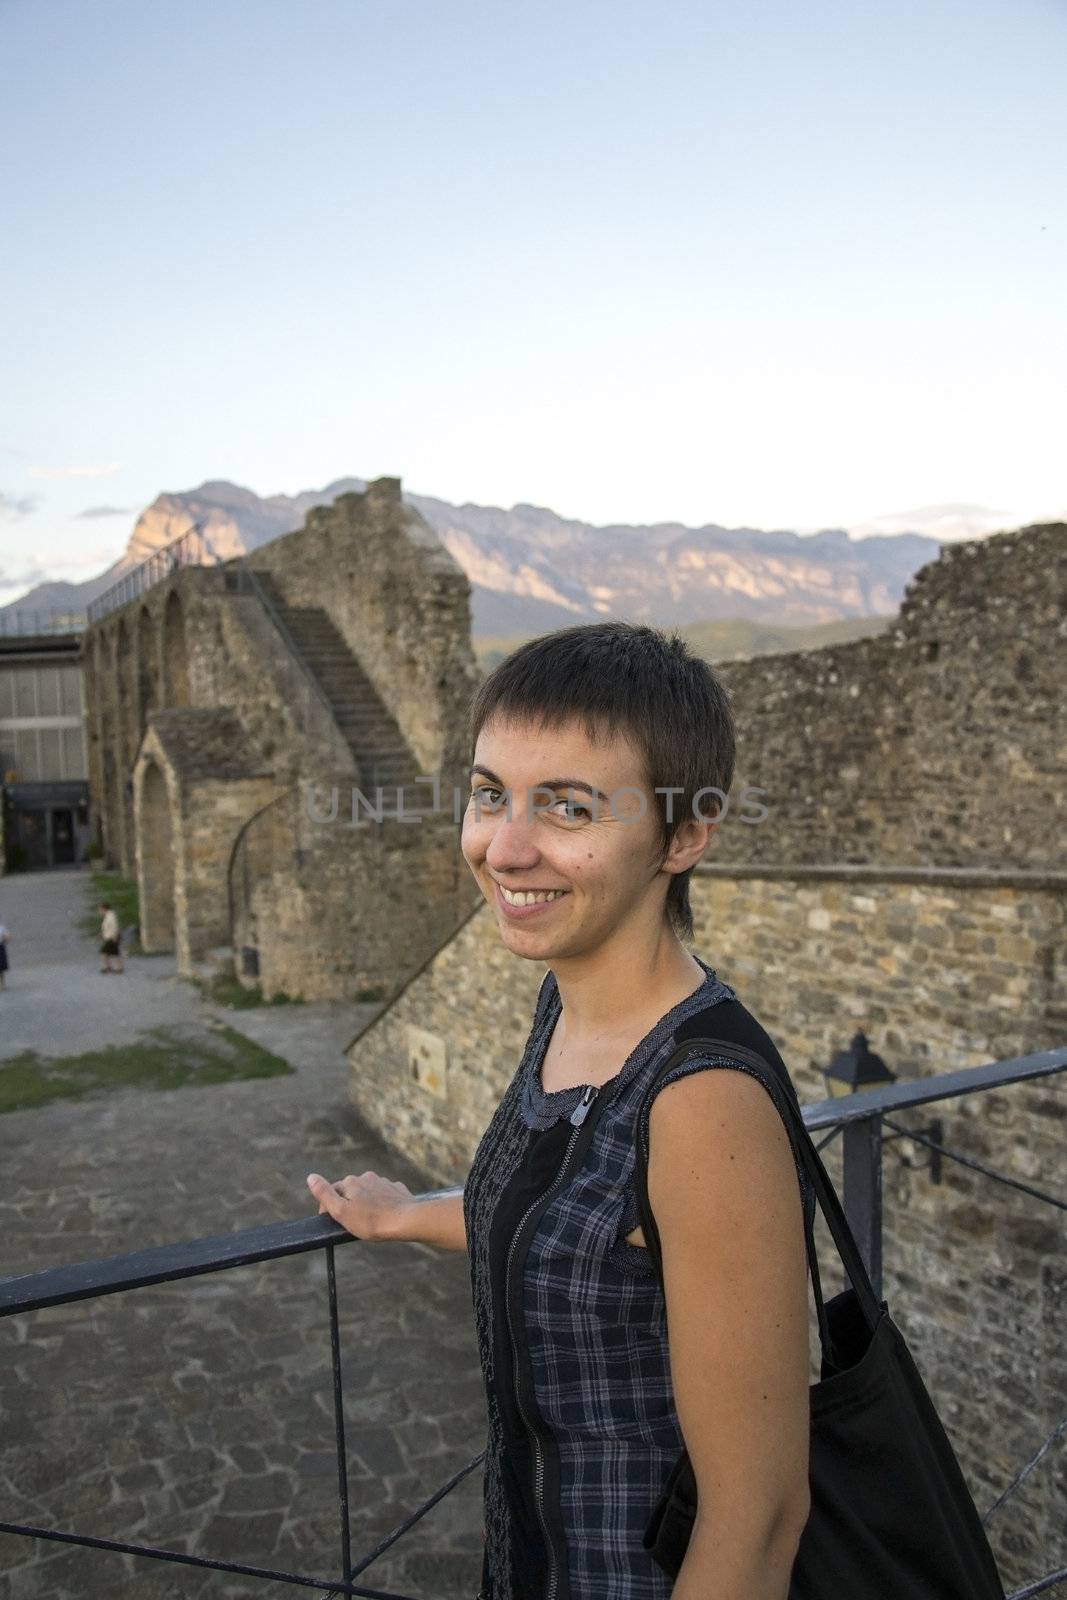 Carol smile in Ainsa castle by itanu